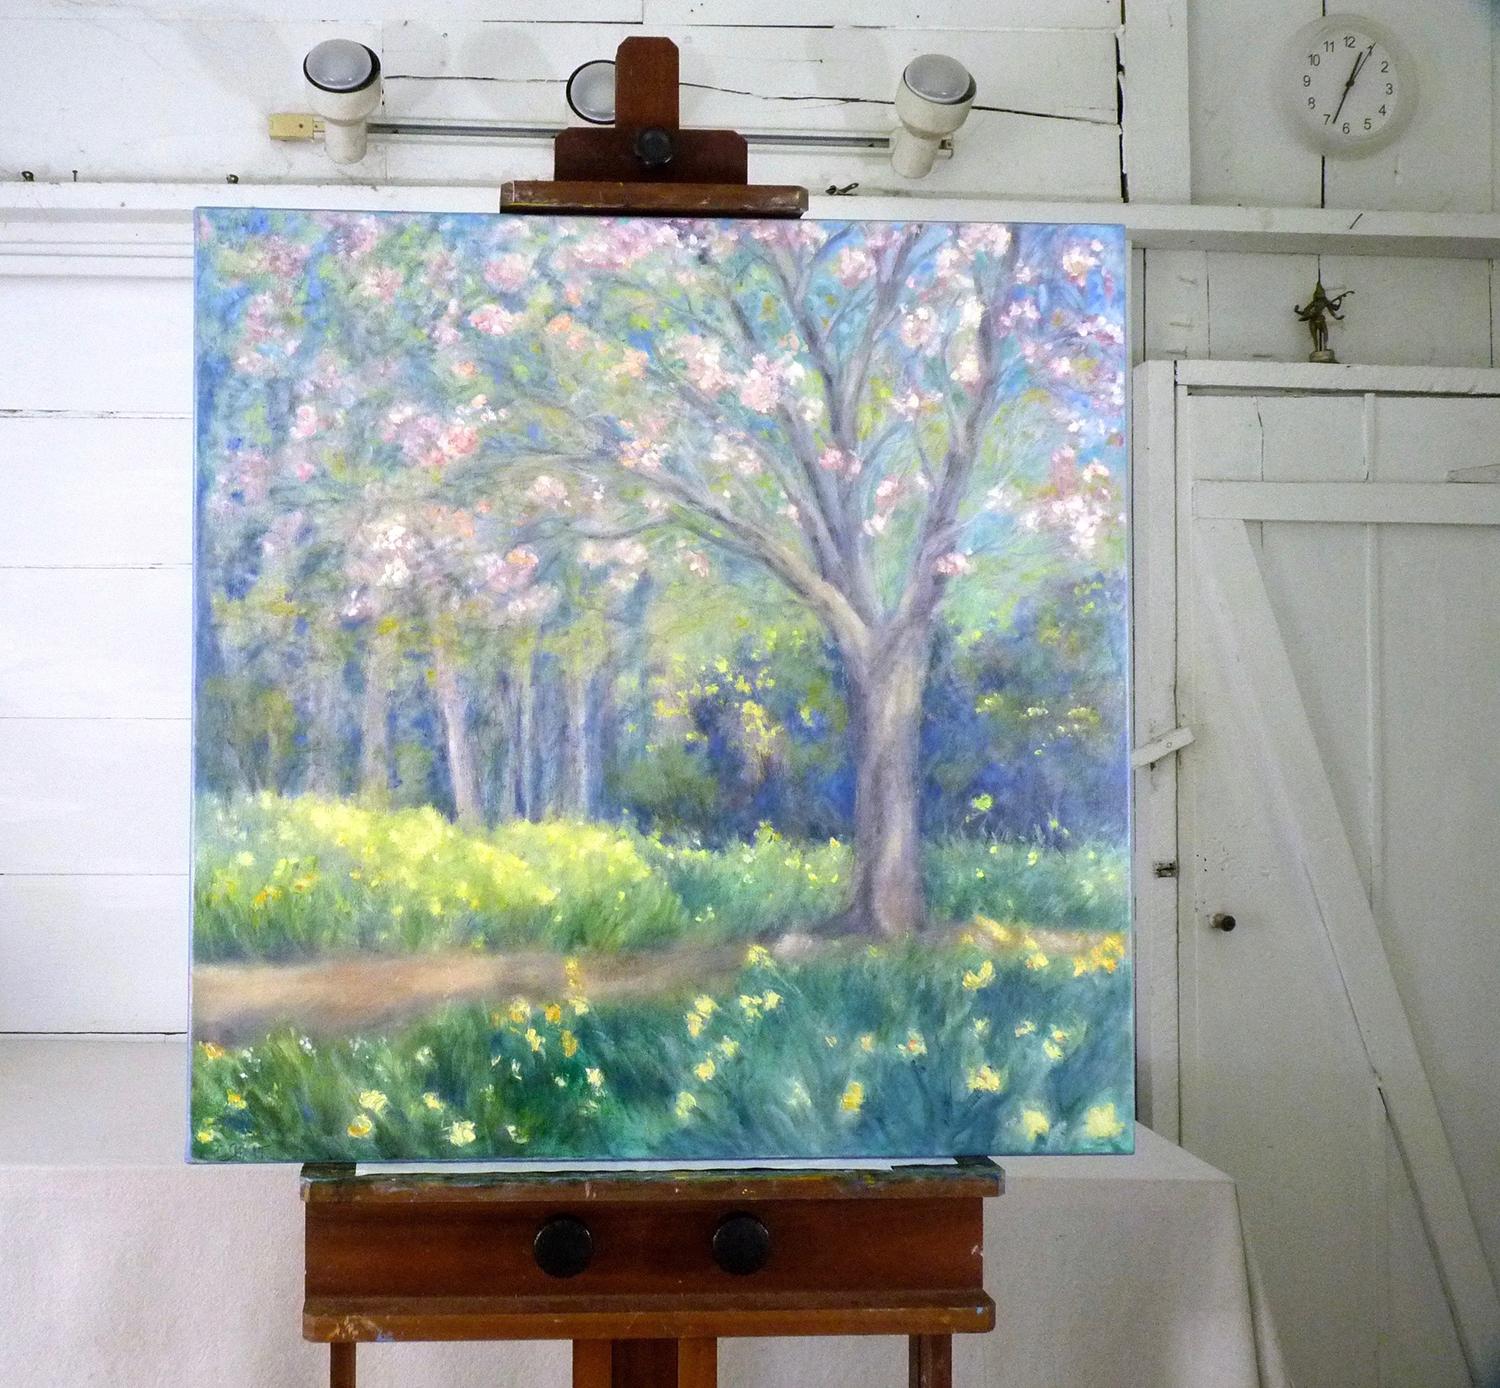 <p>Artist Comments<br />A soft, calming spring landscape, with naturalized daffodils beneath a blossoming cherry tree. Elizabeth used painterly brushwork and pastel colors to convey the light and energy of the scene. The painting has been sealed in